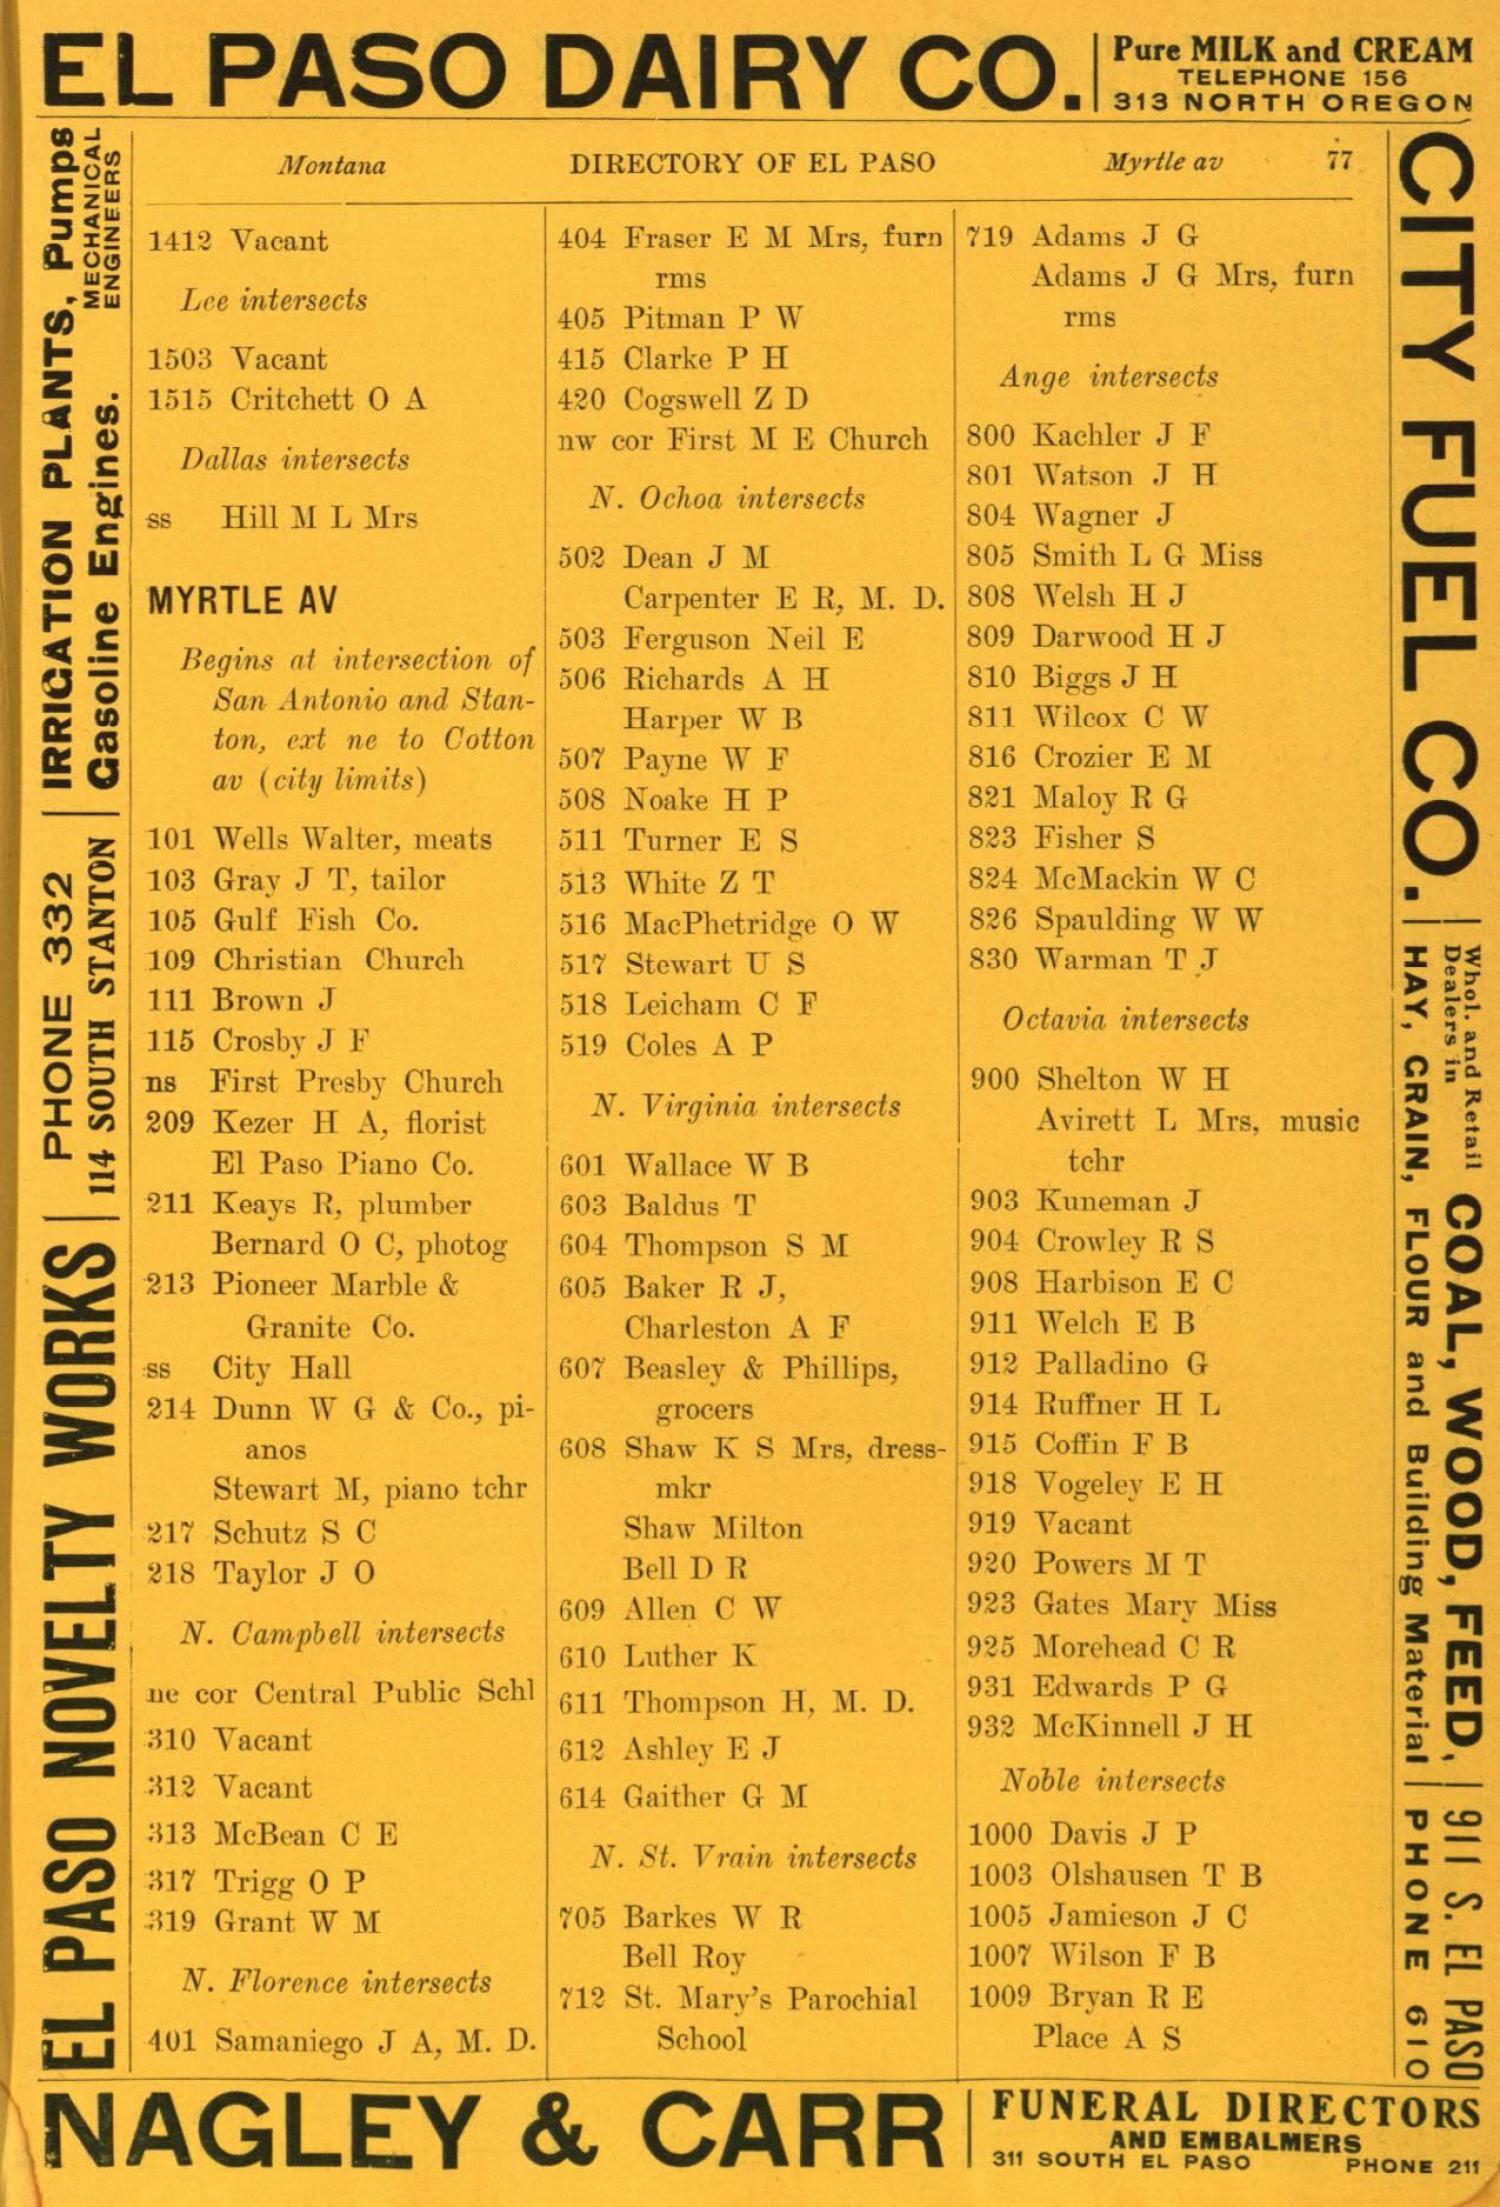 John F. Worley & Co.'s El Paso Directory for 1904
                                                
                                                    77
                                                